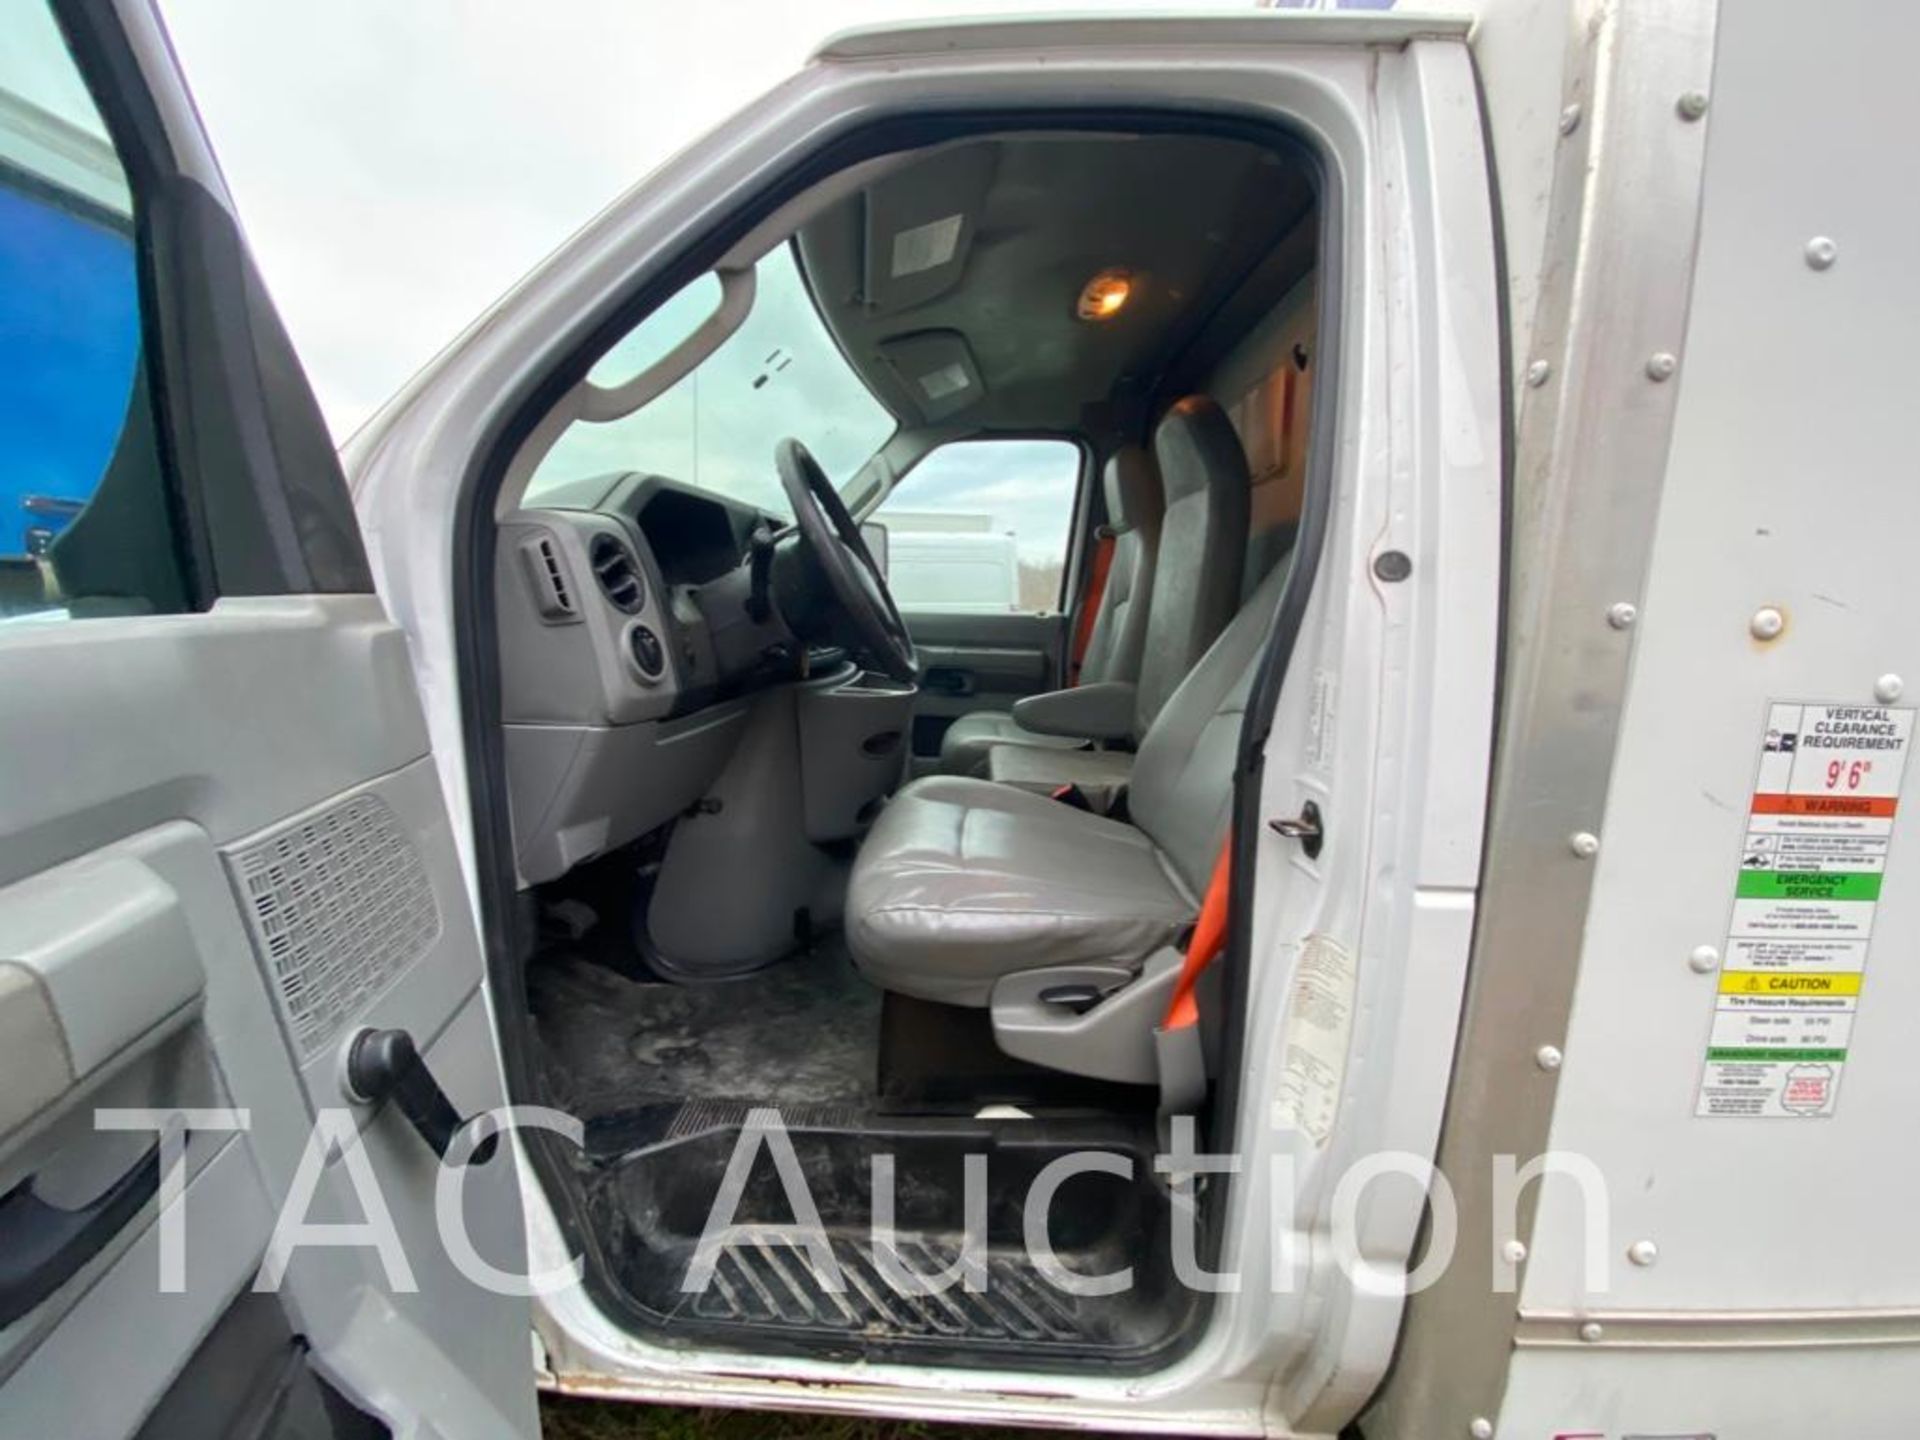 2015 Ford E-350 12ft Box Truck - Image 17 of 73